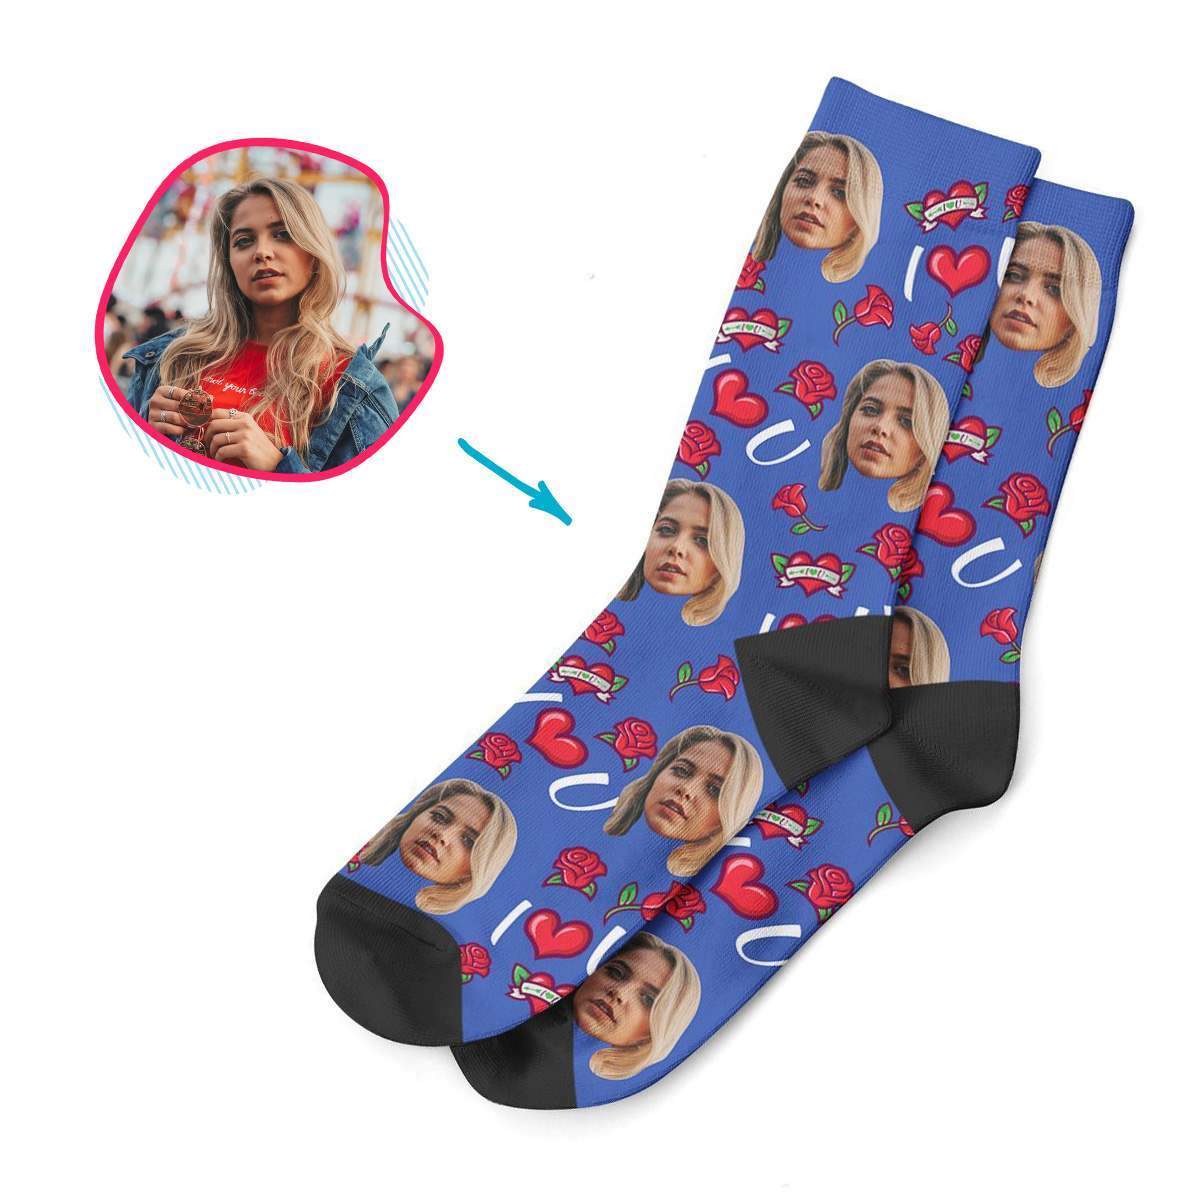 darkblue Valentines socks personalized with photo of face printed on them